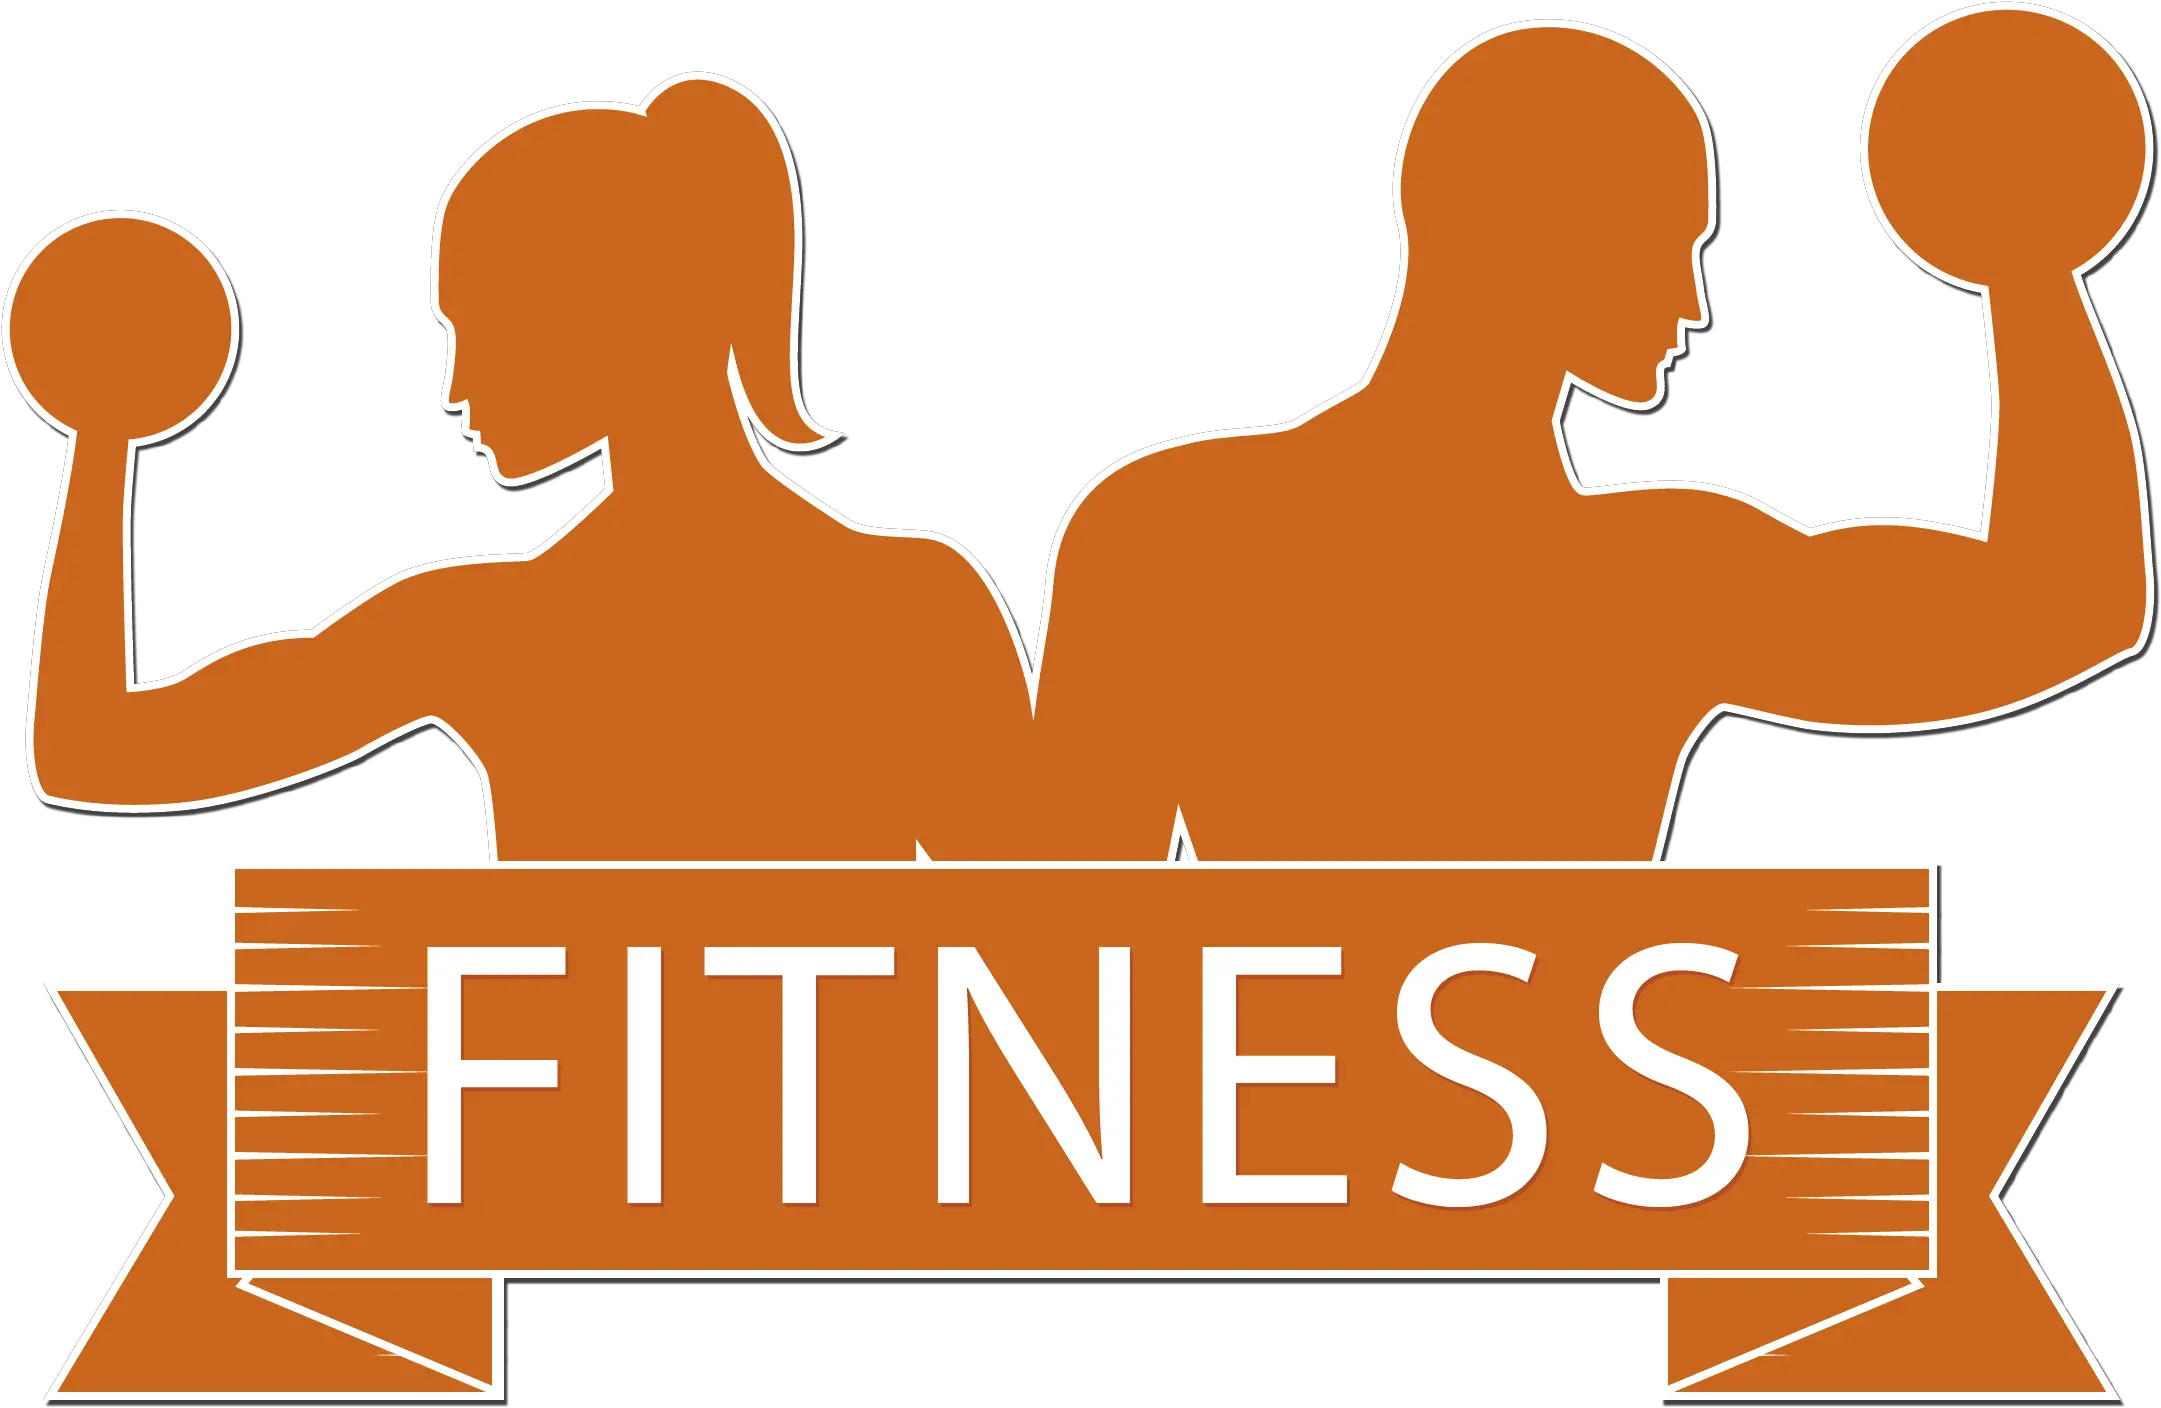 Download Fitness Logo Vector Creative Hd Png Hq Fitness Logo Vector Png Fitness Logo